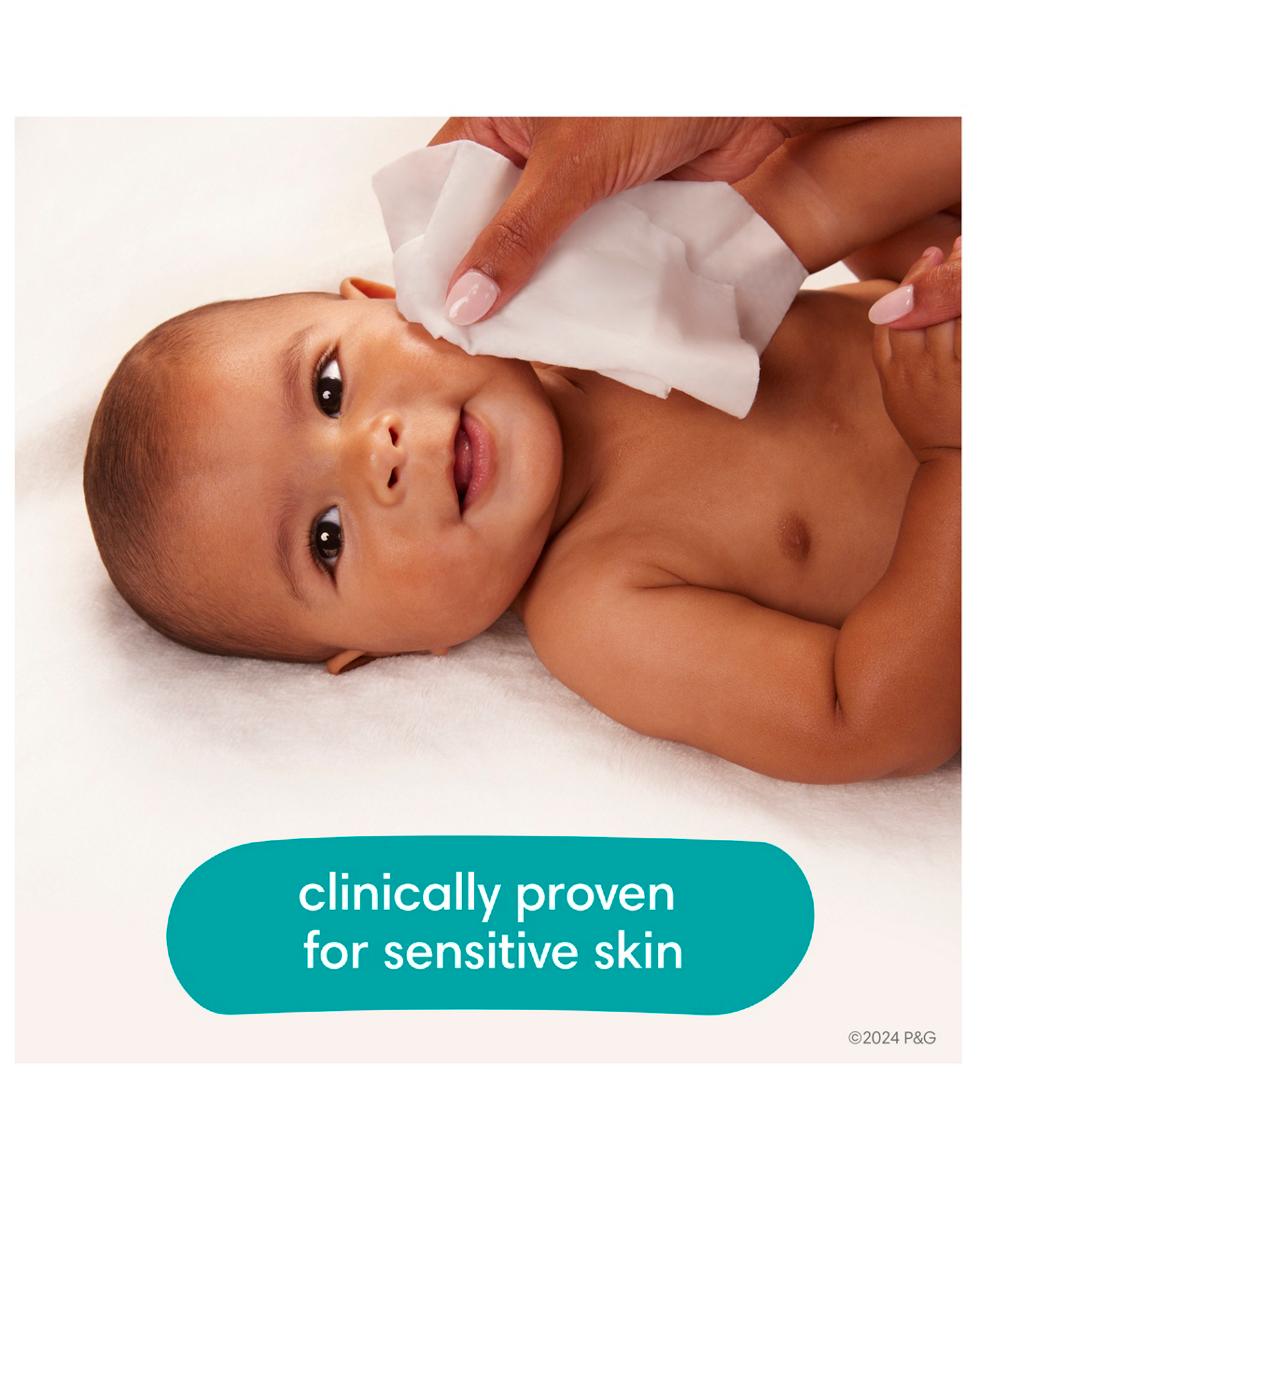 Pampers Sensitive Skin Baby Wipes; image 5 of 10